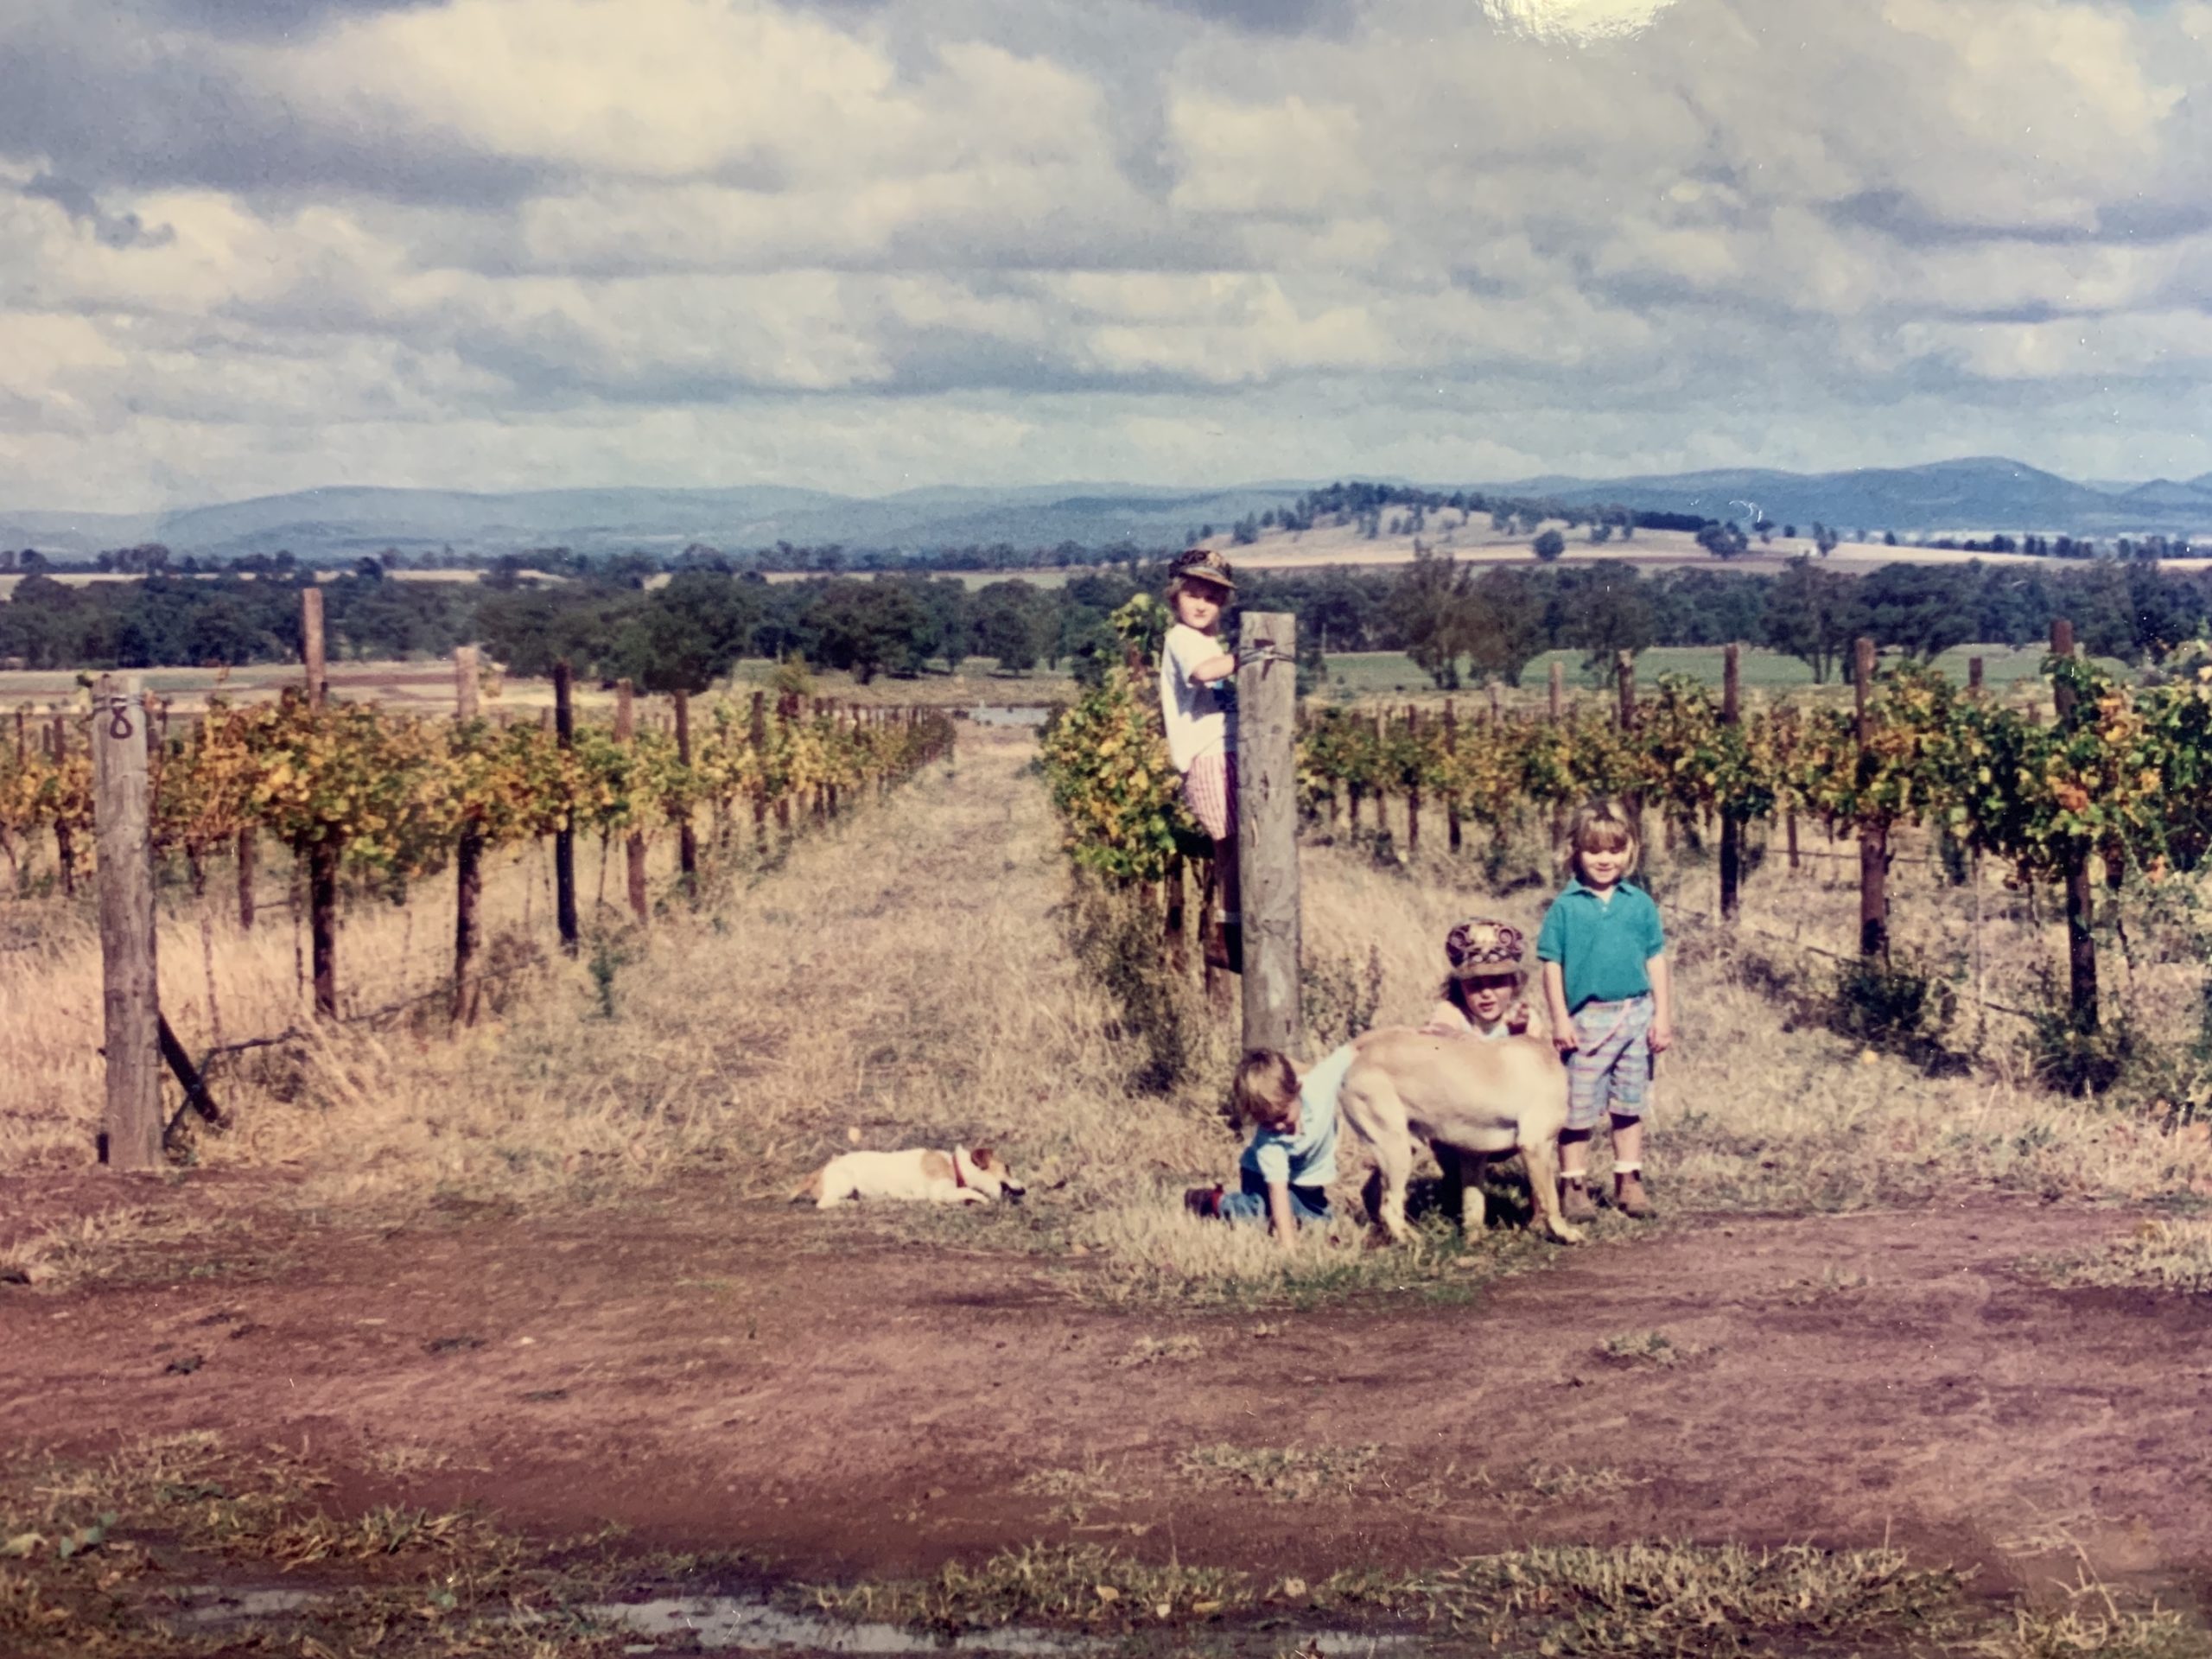 Nadja and her three sisters; Isabella, Veronica and Gabrielle at the Wallington Vineyard in Canowindra.  (Nadja is the one climbing the headpost)